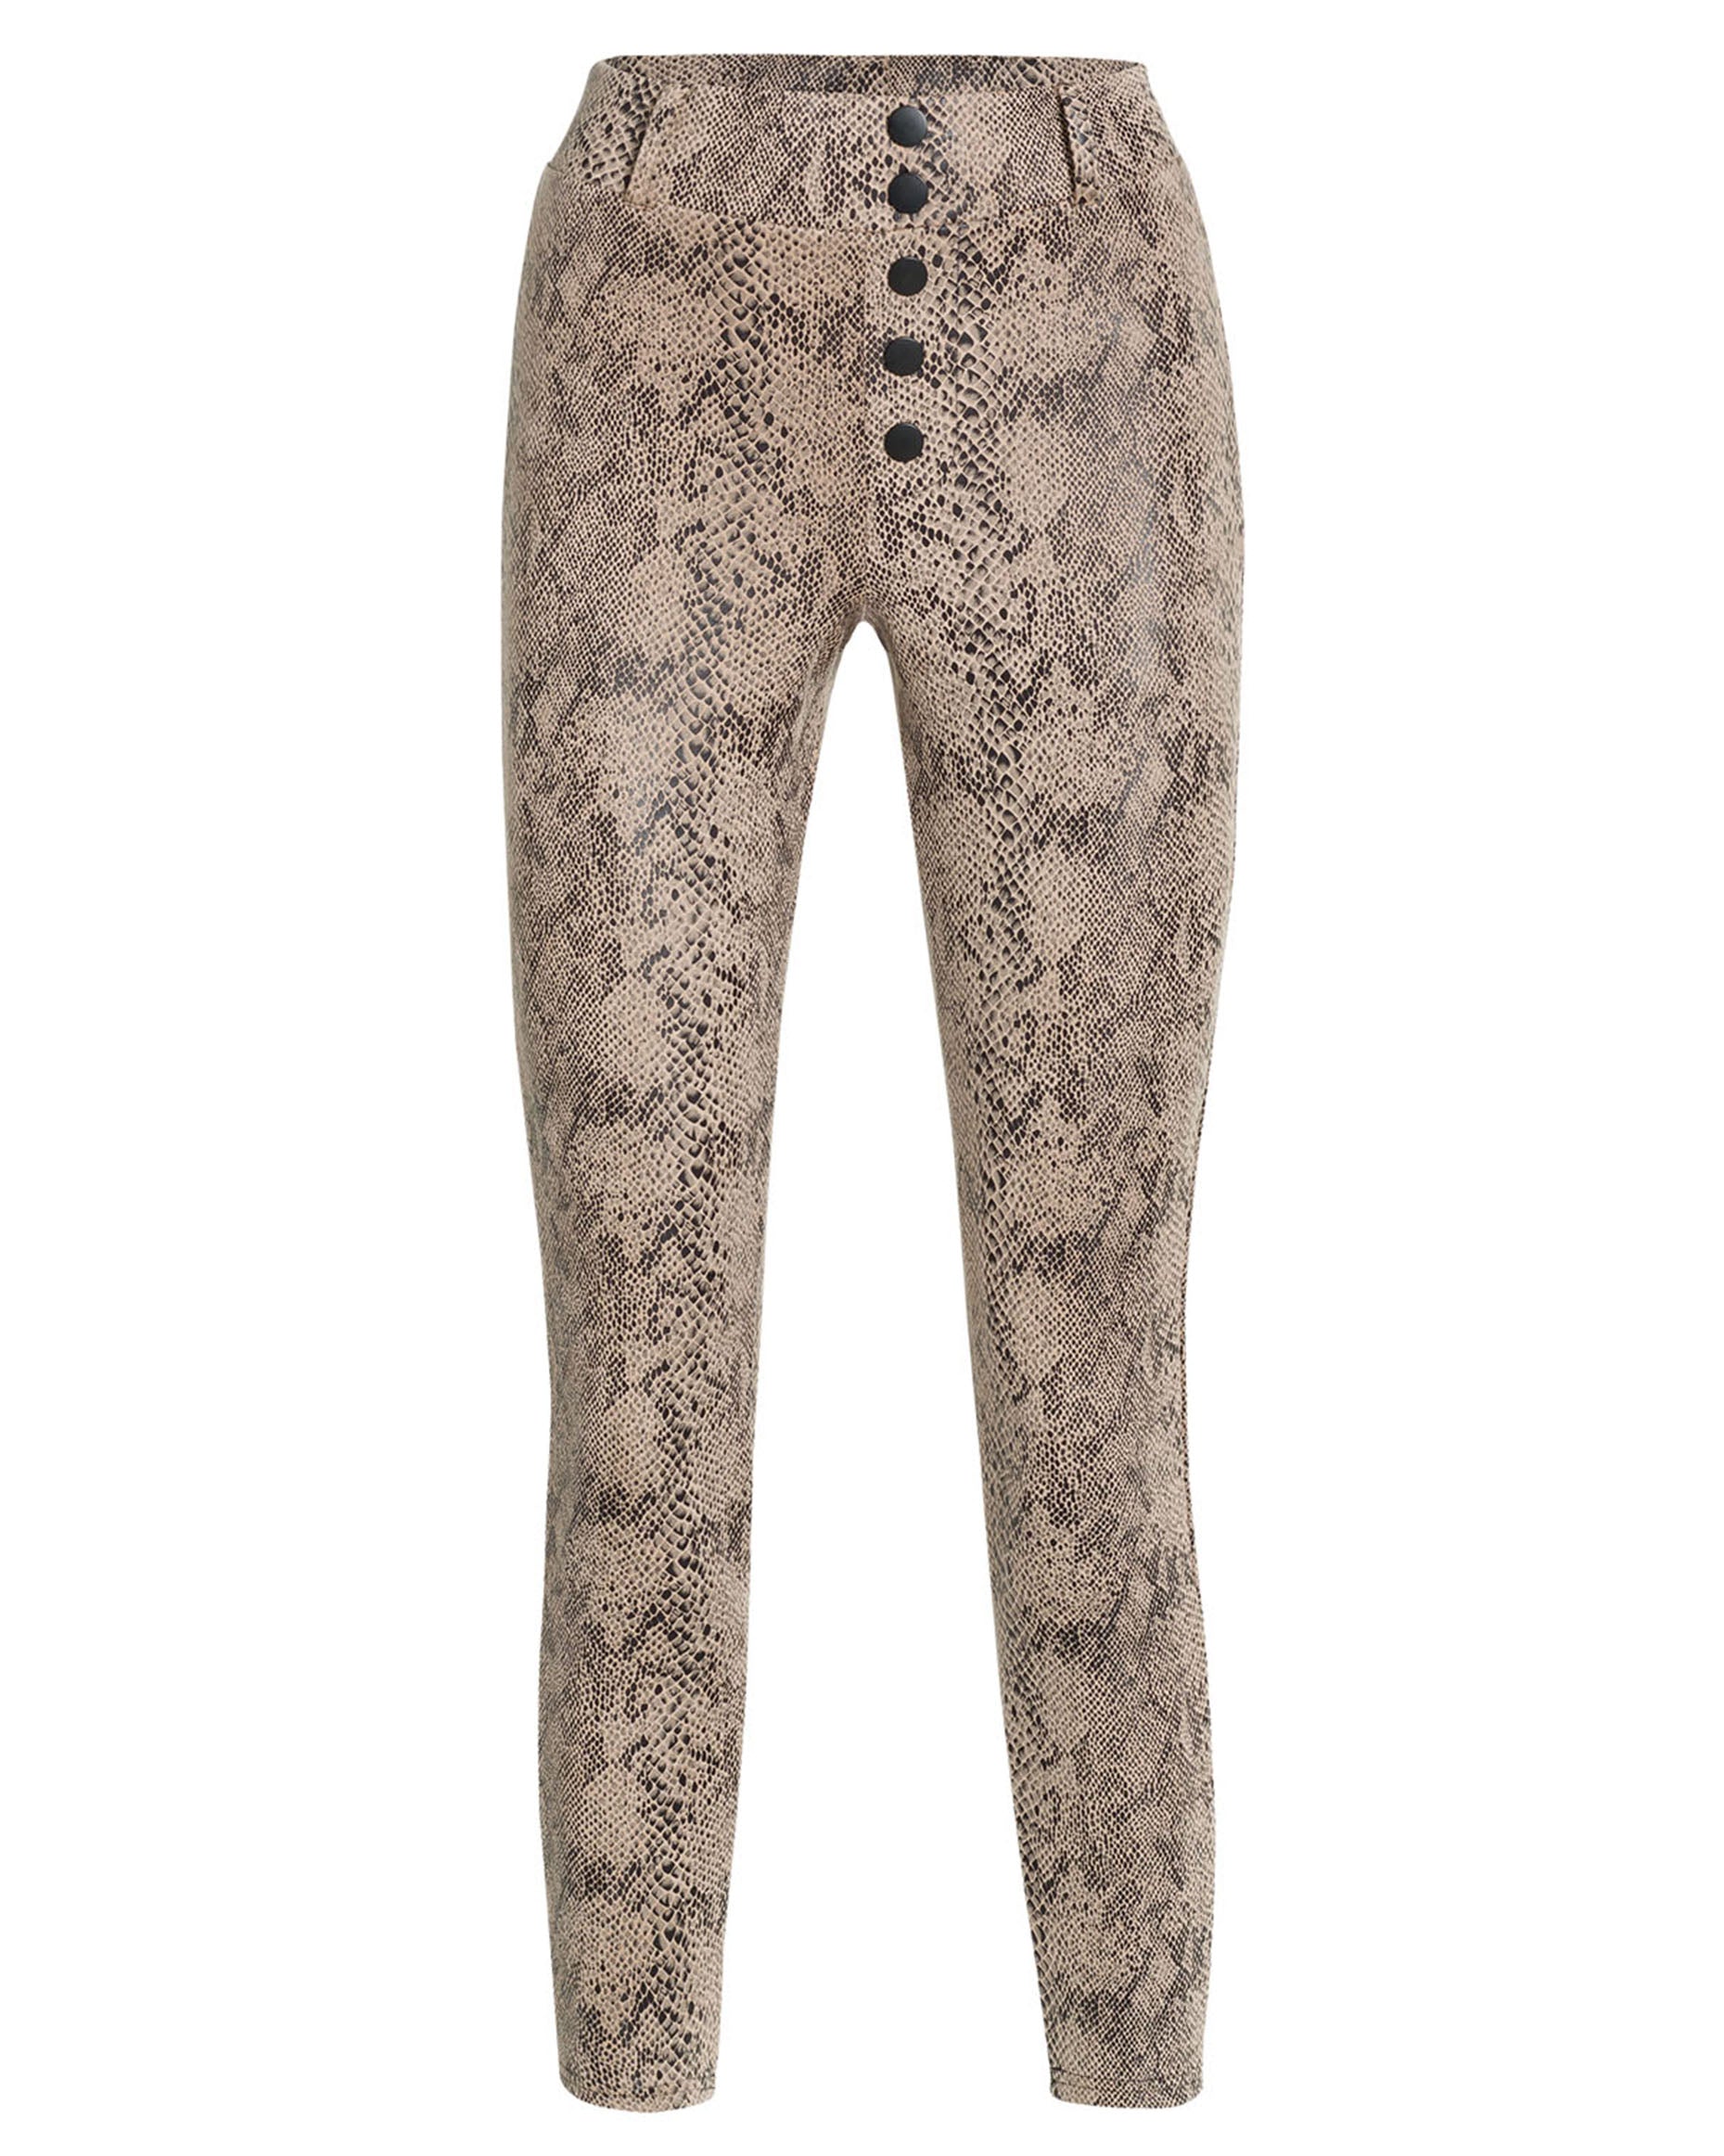 Ysabel Mora 70276 Leggings - Beige slimming trouser leggings (treggings) with an all over snake skin print style pattern, rear pockets, belt loops and black faux button closures.